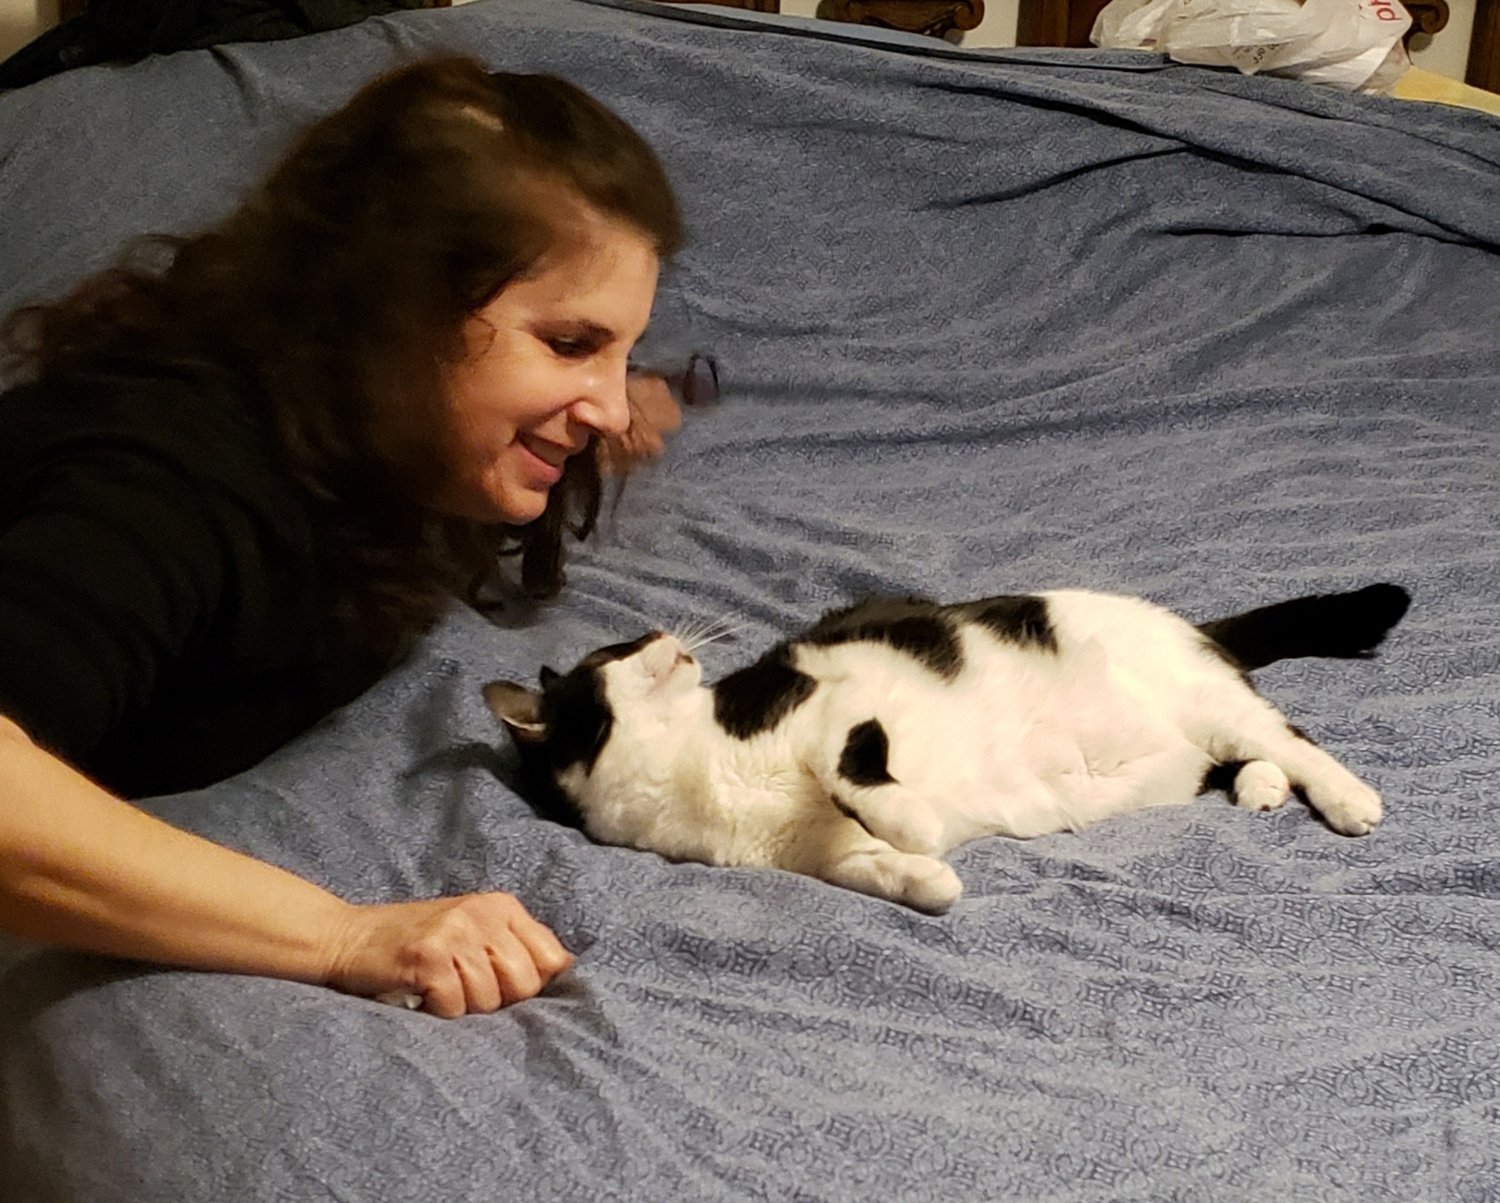 Stasie Fishman has an affectionate relationship with her feline friends. Here, the Merrick resident is pictured with Bettinna, the star of her book “Bettinna’s Tail.”